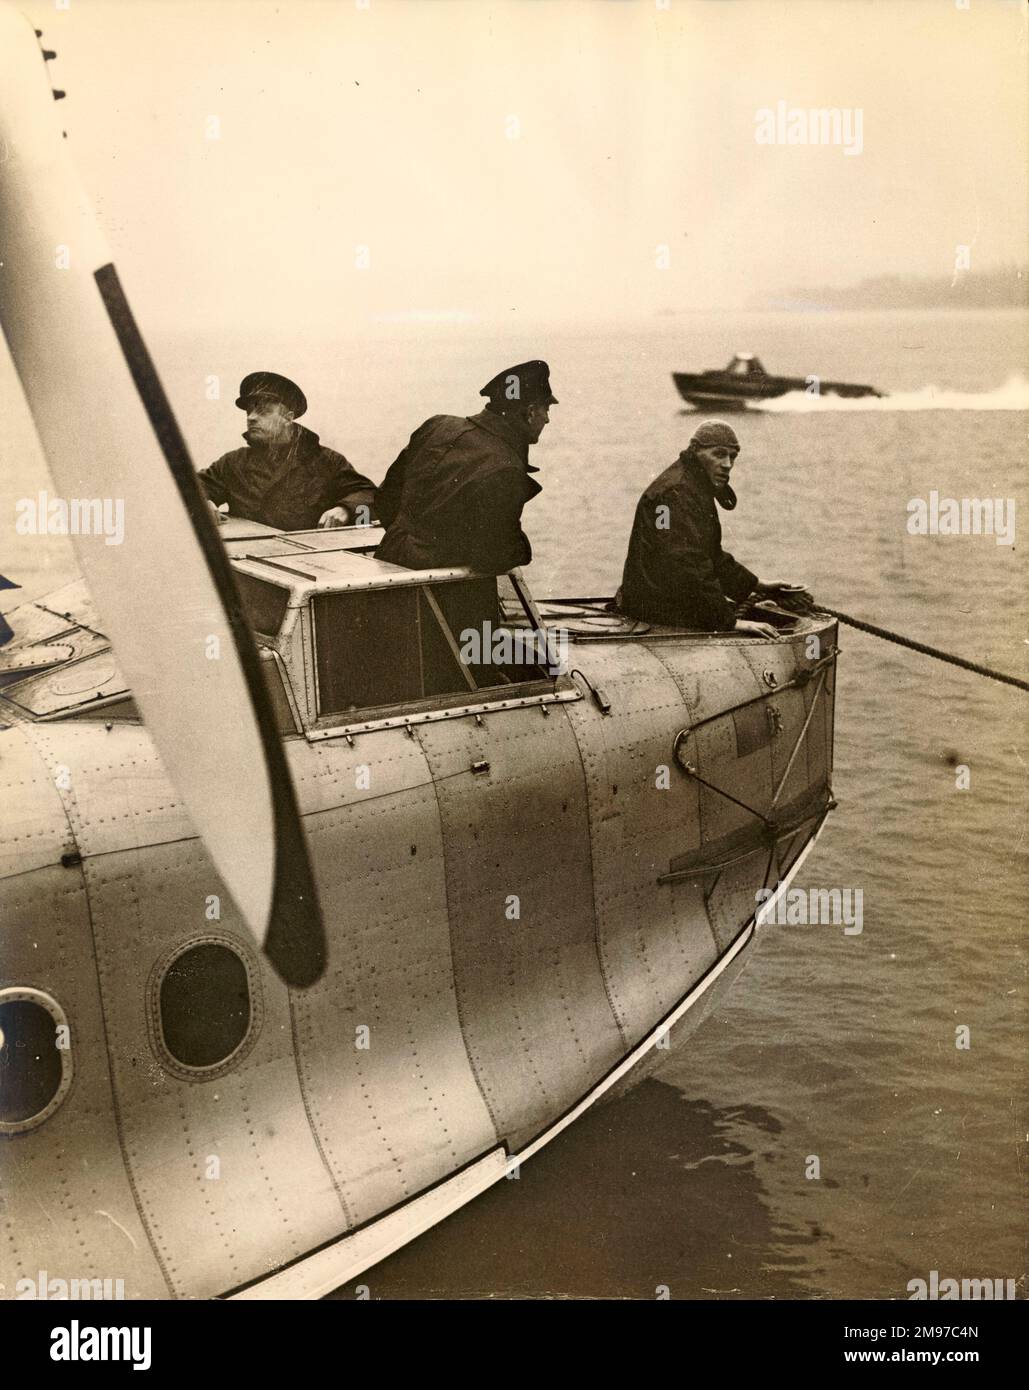 Receiving instructions on flying boats in a Short S8/8 Rangoon flying boat at The Air University, Hamble, Hants. Seaplane Instructor Flt Lt Pascoe (centre) gives instruction on mooring to First Officer F.D. Smith (left) and First Officer J.F. Nicholas, two Imperial Airways pilots. [see also 56006142] Stock Photo